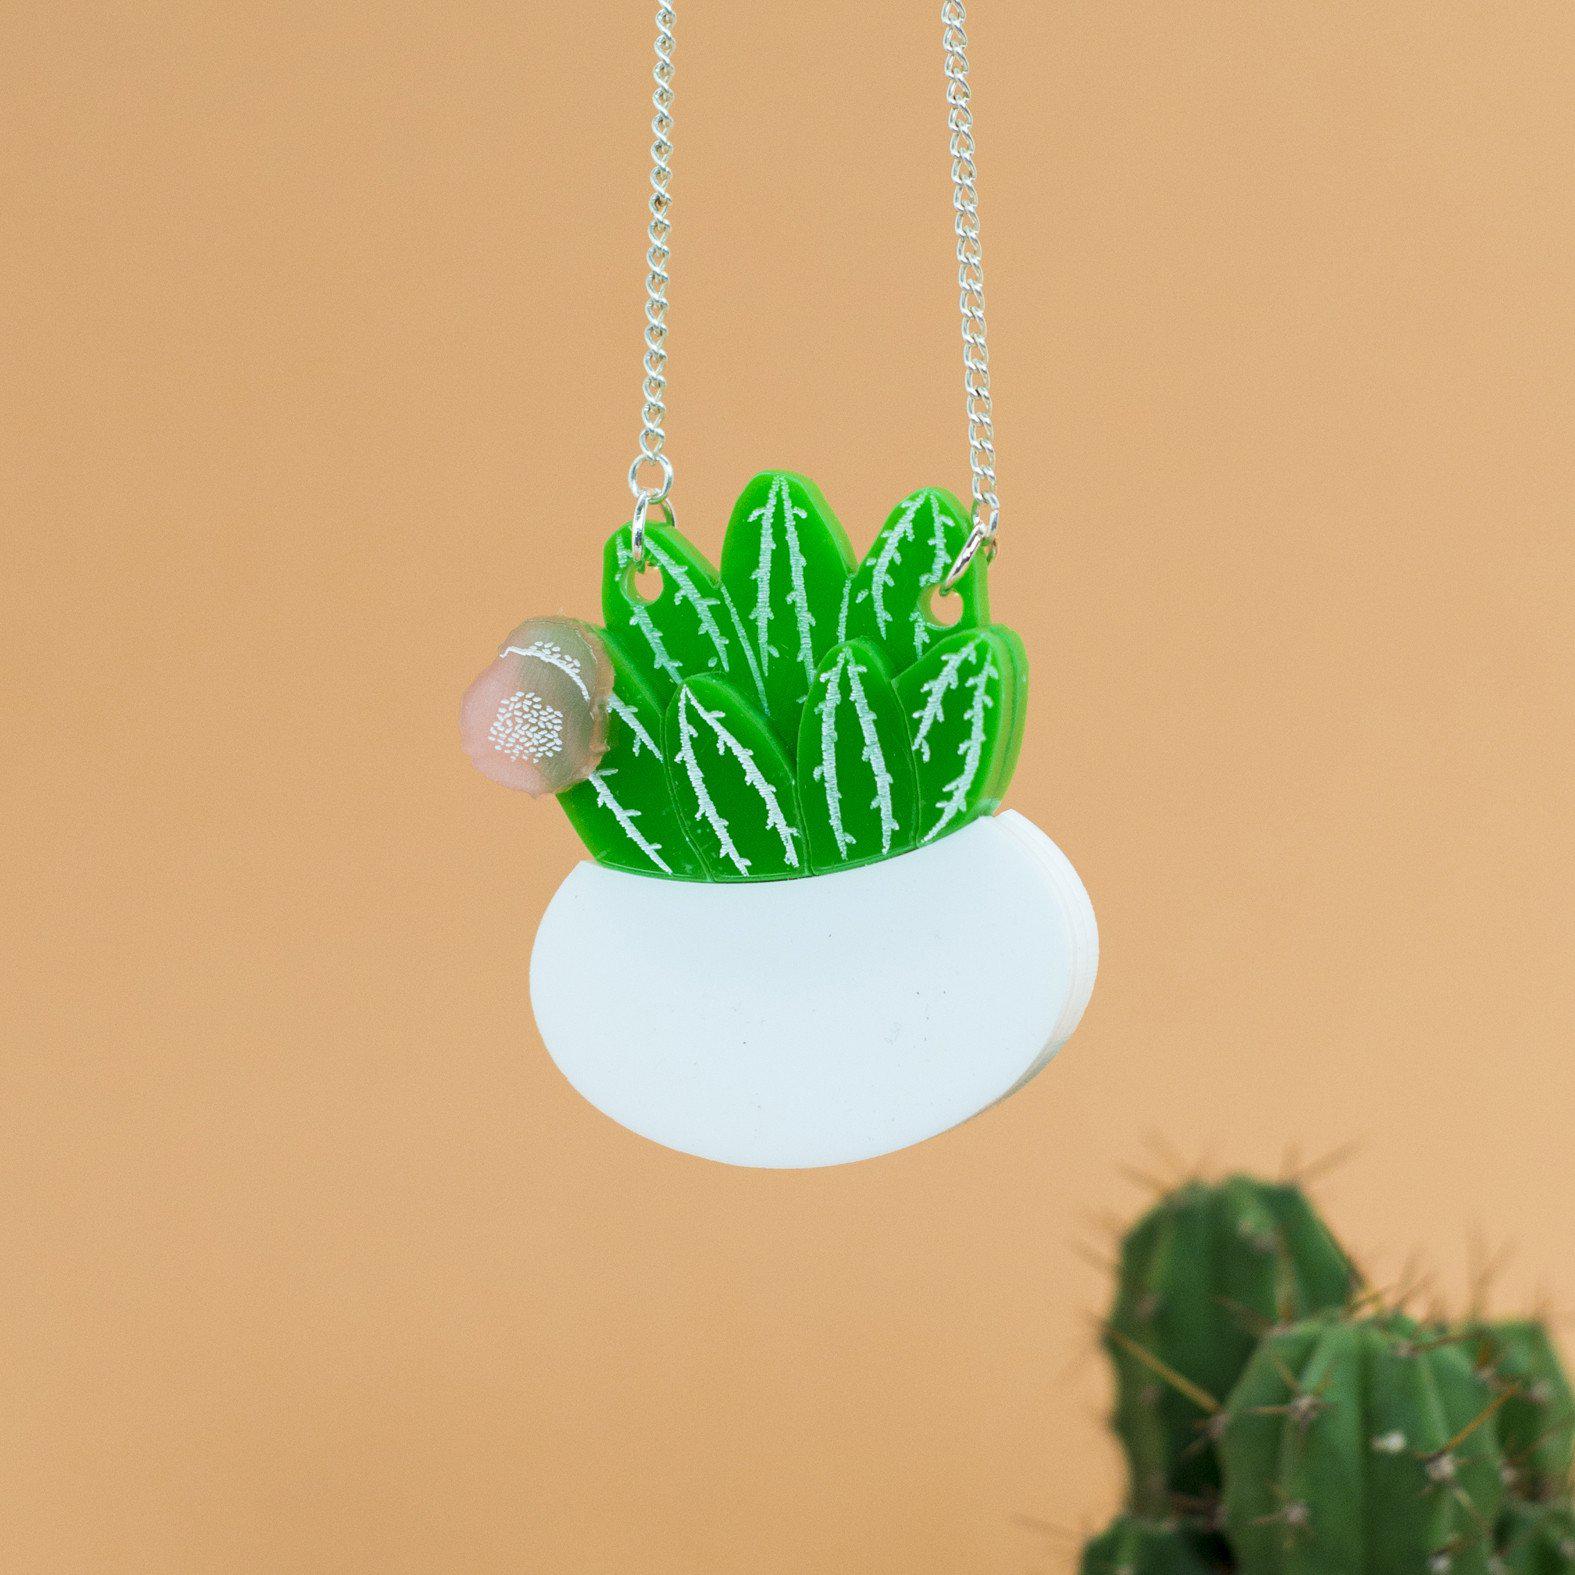 Flowering Cactus Necklace - Finest Imaginary